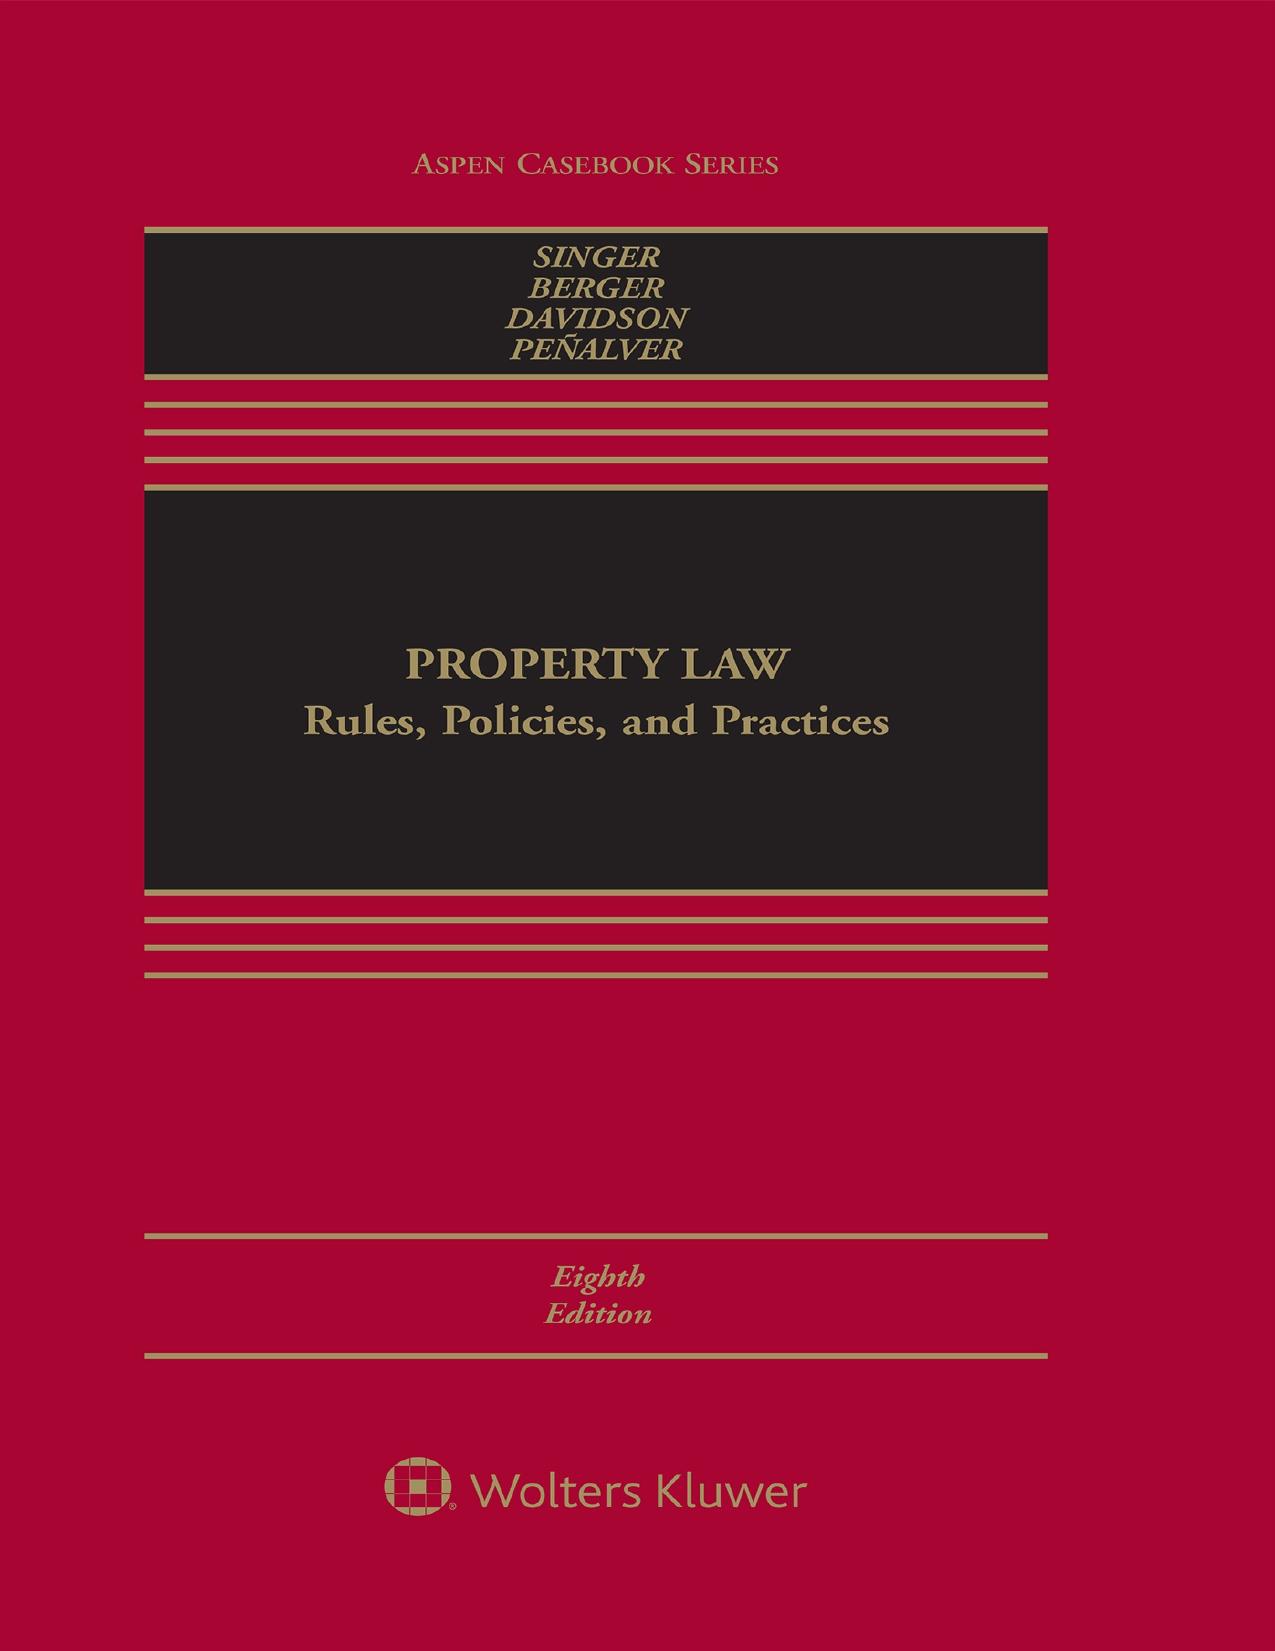 (eBook PDF)Property Law: Rules, Policies, and Practices 8th Edition by Joseph William Singer , Bethany R. Berger